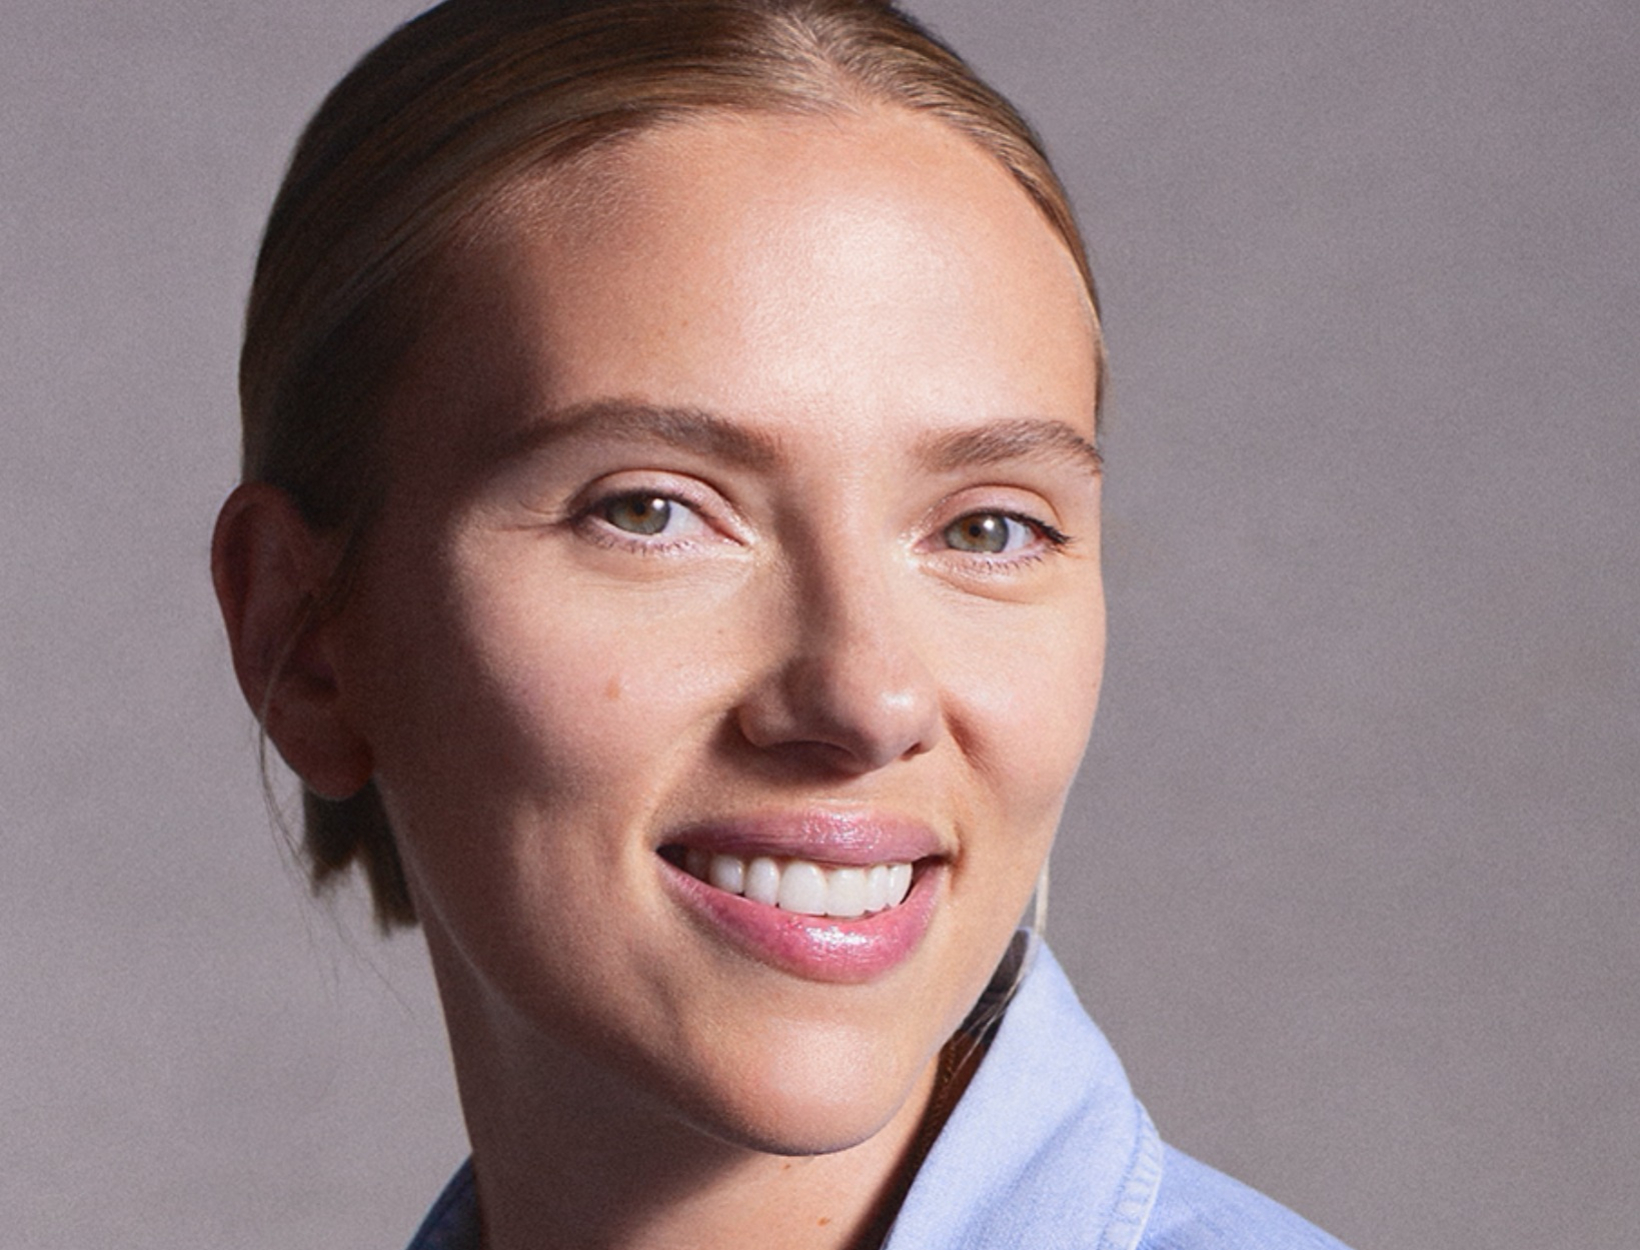 Scarlett Johansson relied on free school lunch. Now she's advocating for  food security